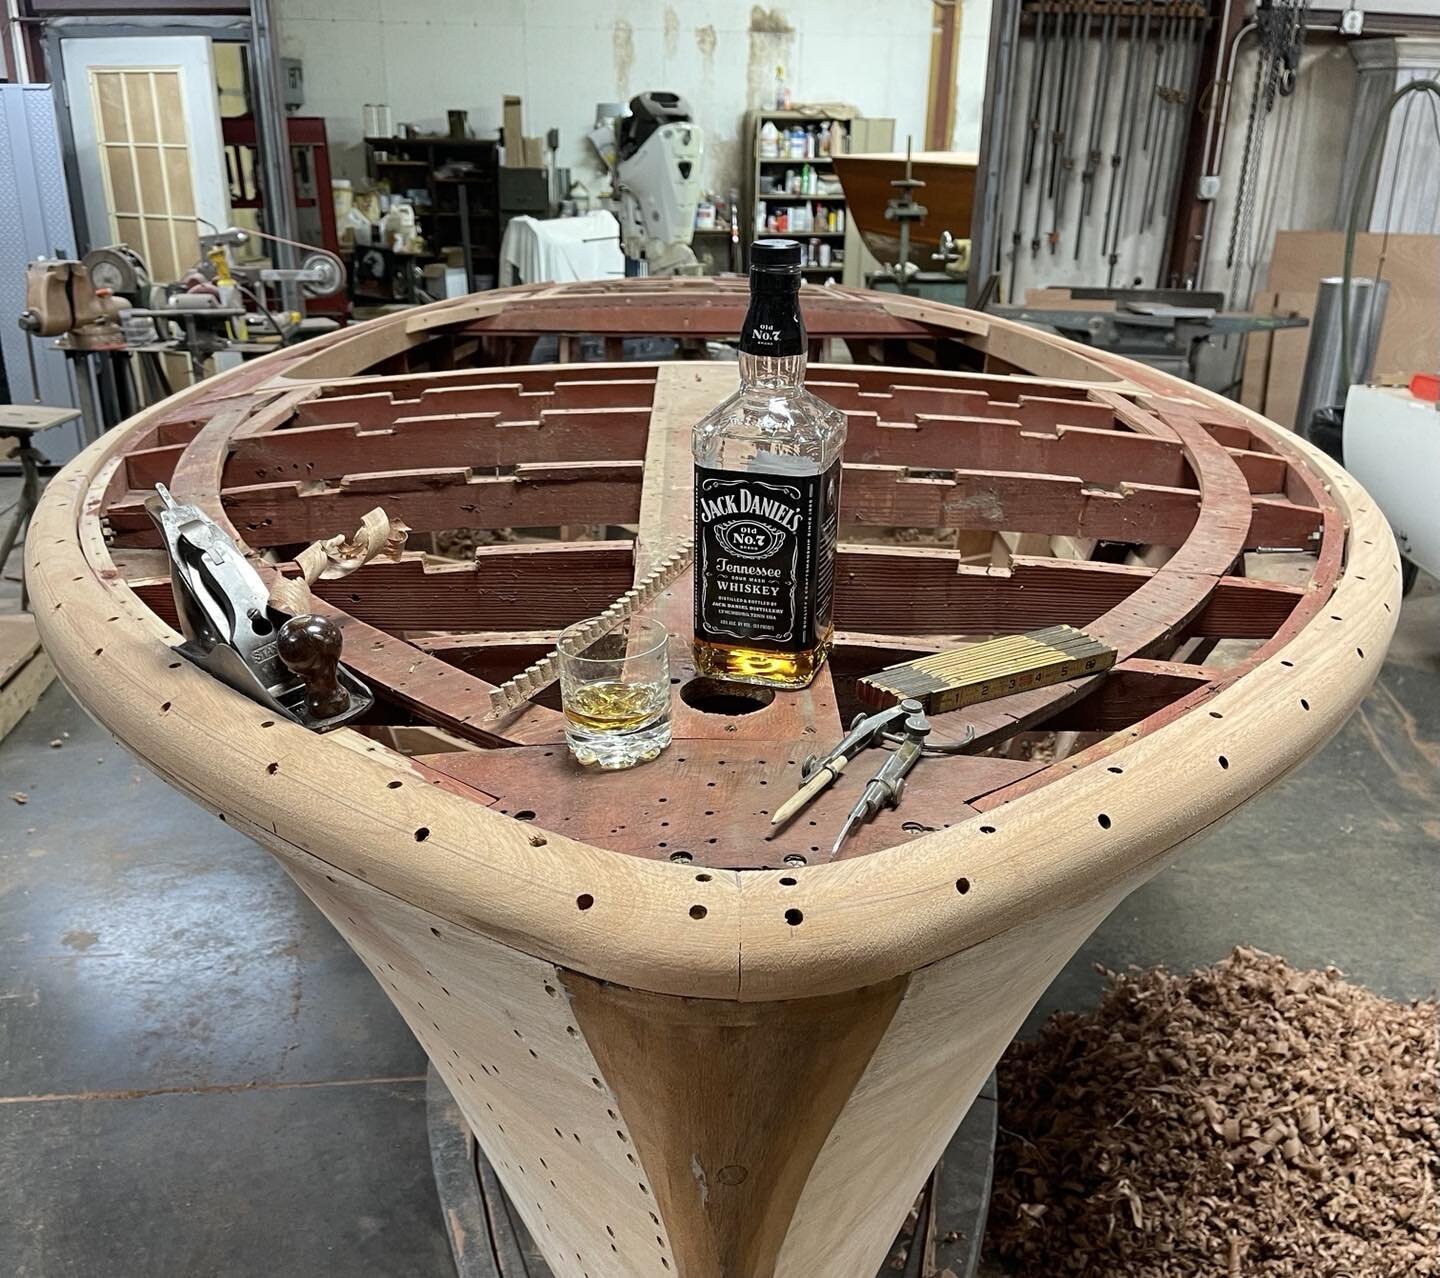 Long day sculpting the covering boards on this 1947 Chris Craft Deluxe. Lil Tennessee whiskey, Tennessee Boat building.  #woodyboater
#woodworking
#finewoodworking
#woodboatsarebetter
#wood
#powerboats
#alanjacksonboats
#craftsmanship
#chriscraft
#bo